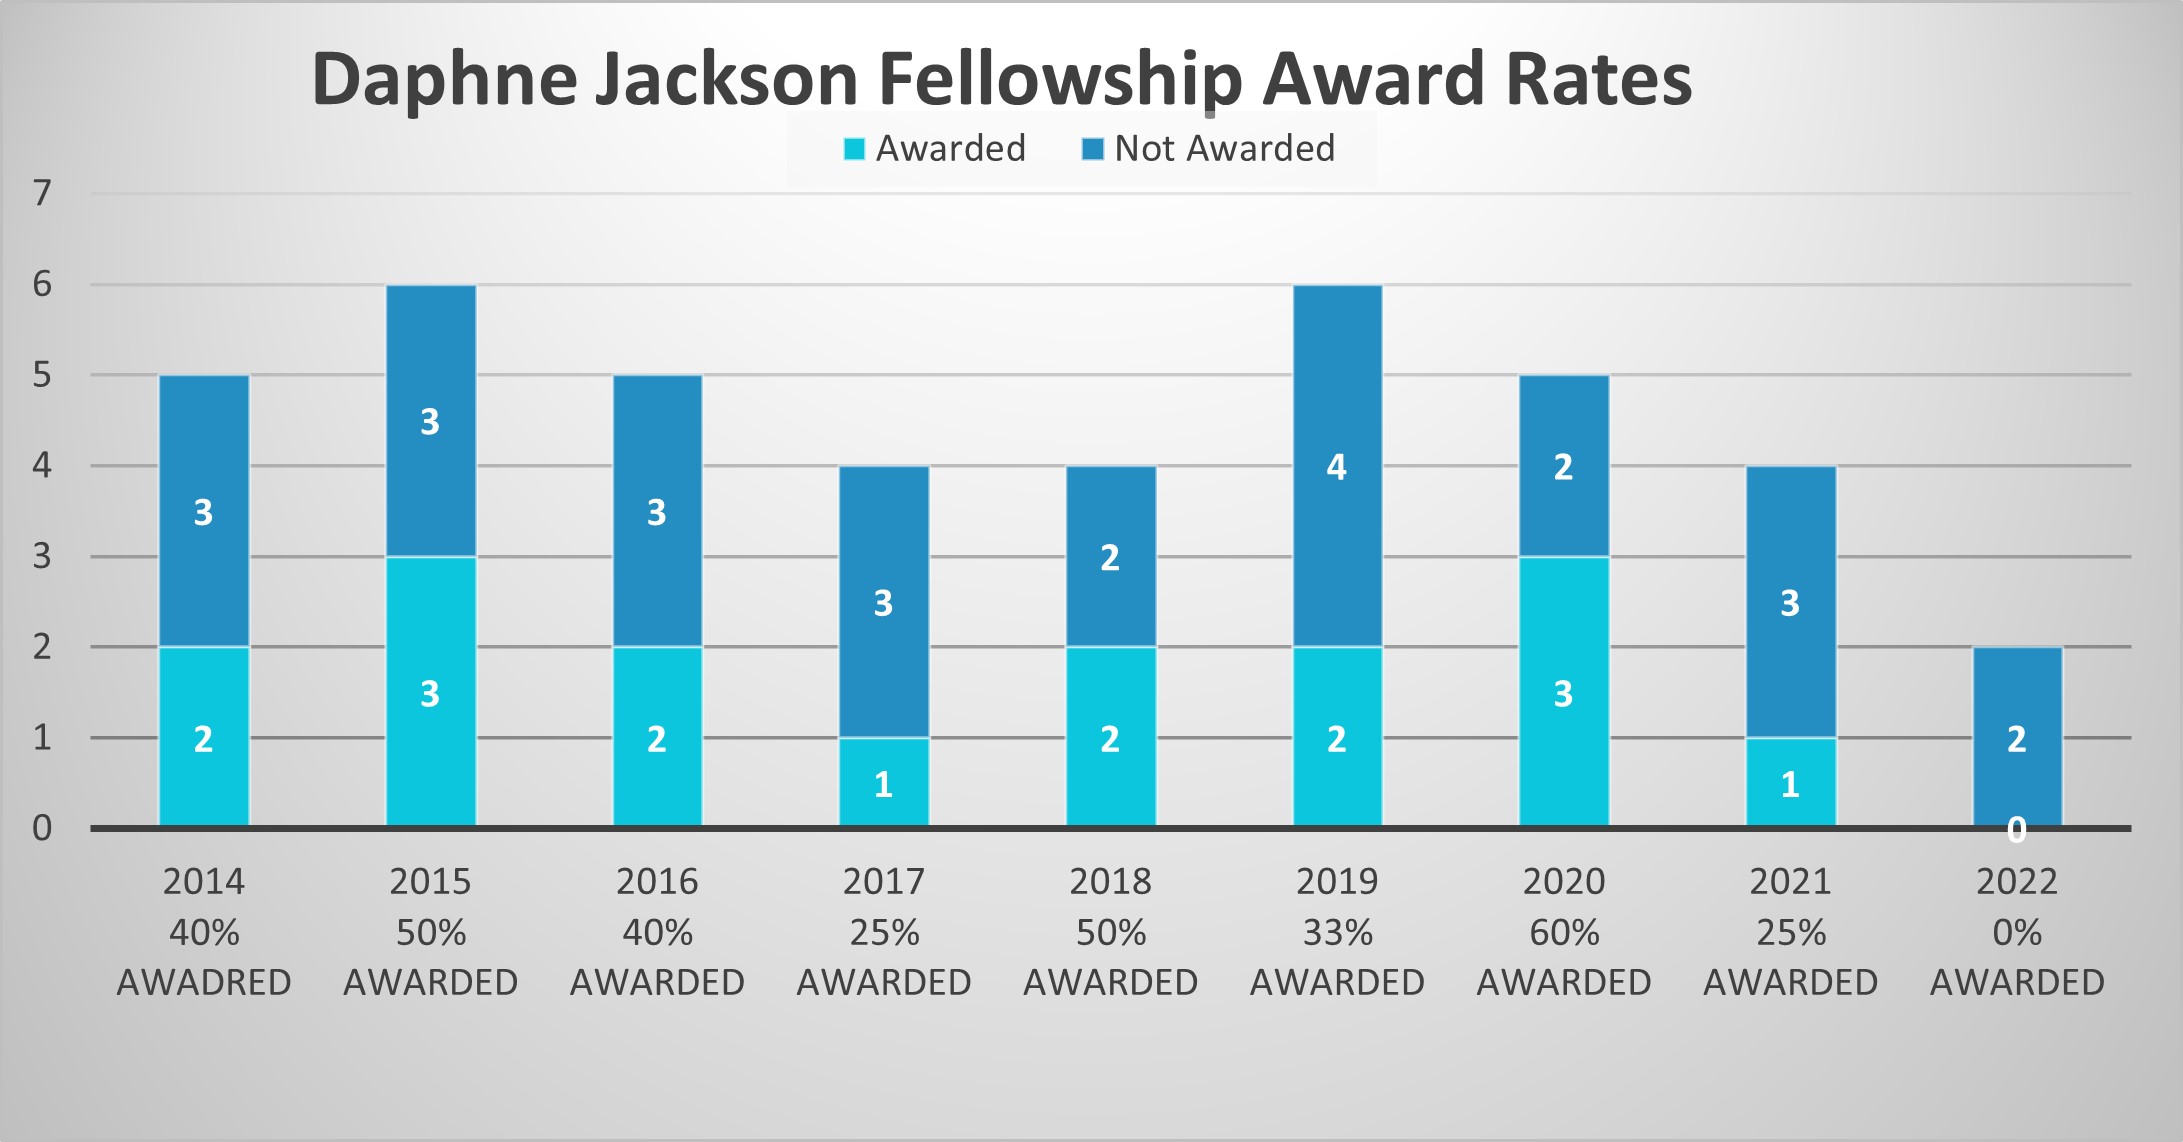 Chart showing how the application and award rates varied from 2014 to 2022 for Daphne Jackson Fellowships